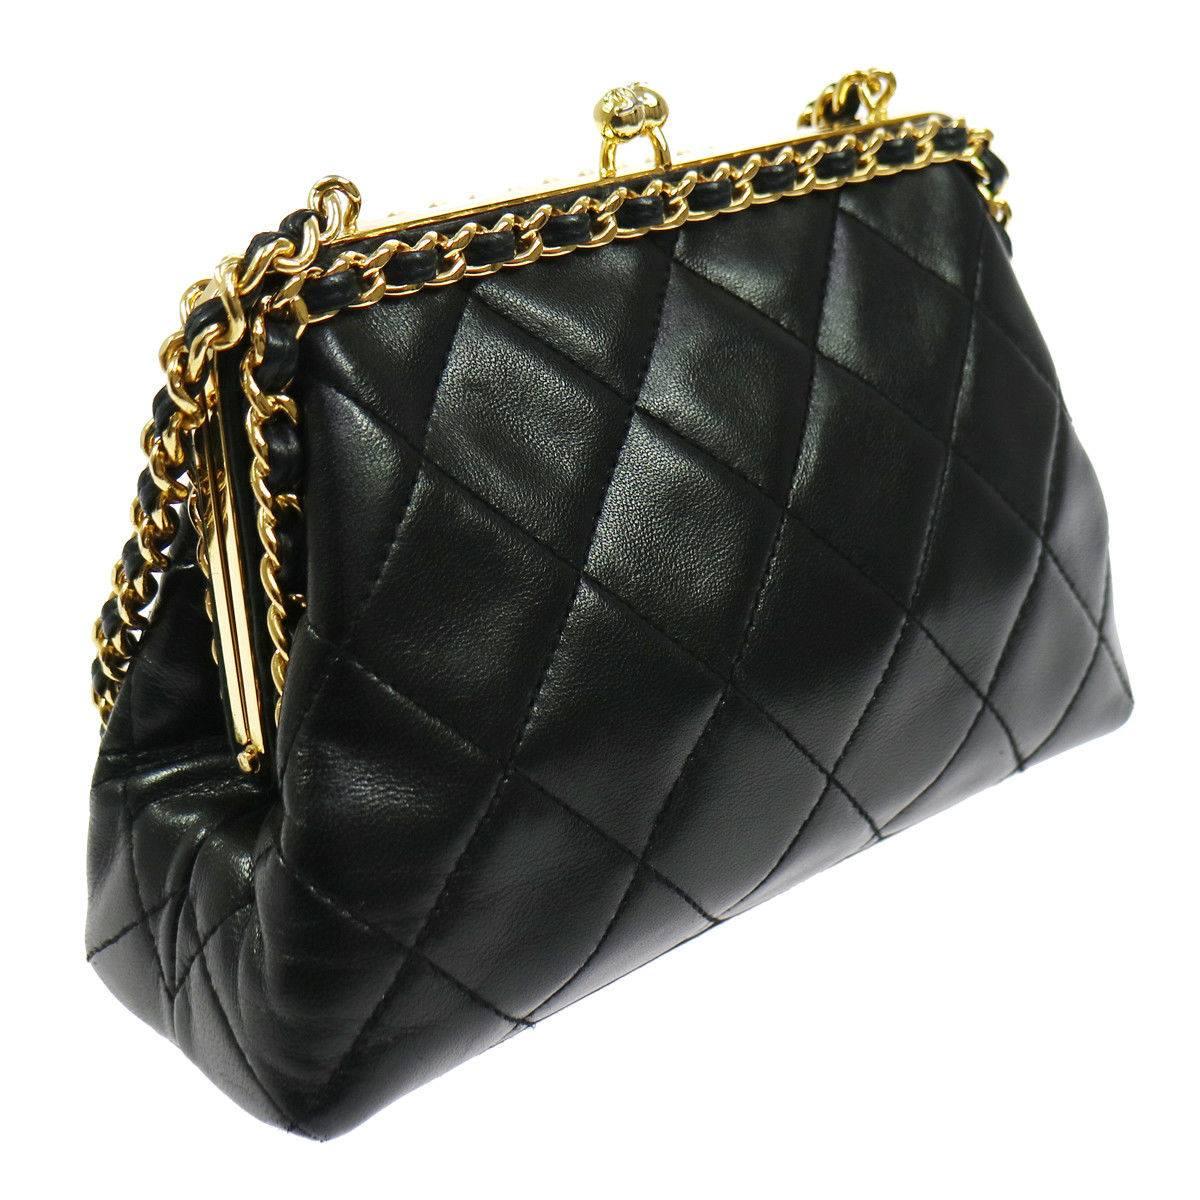 Chanel Black Lambskin Wraparound KissLock Party Evening Top Handle Shoulder Bag in Box

Lambskin leather
Gold tone hardware
Kisslock closure
Leather lining
Date code present
Made in Italy
Shoulder strap drop 8